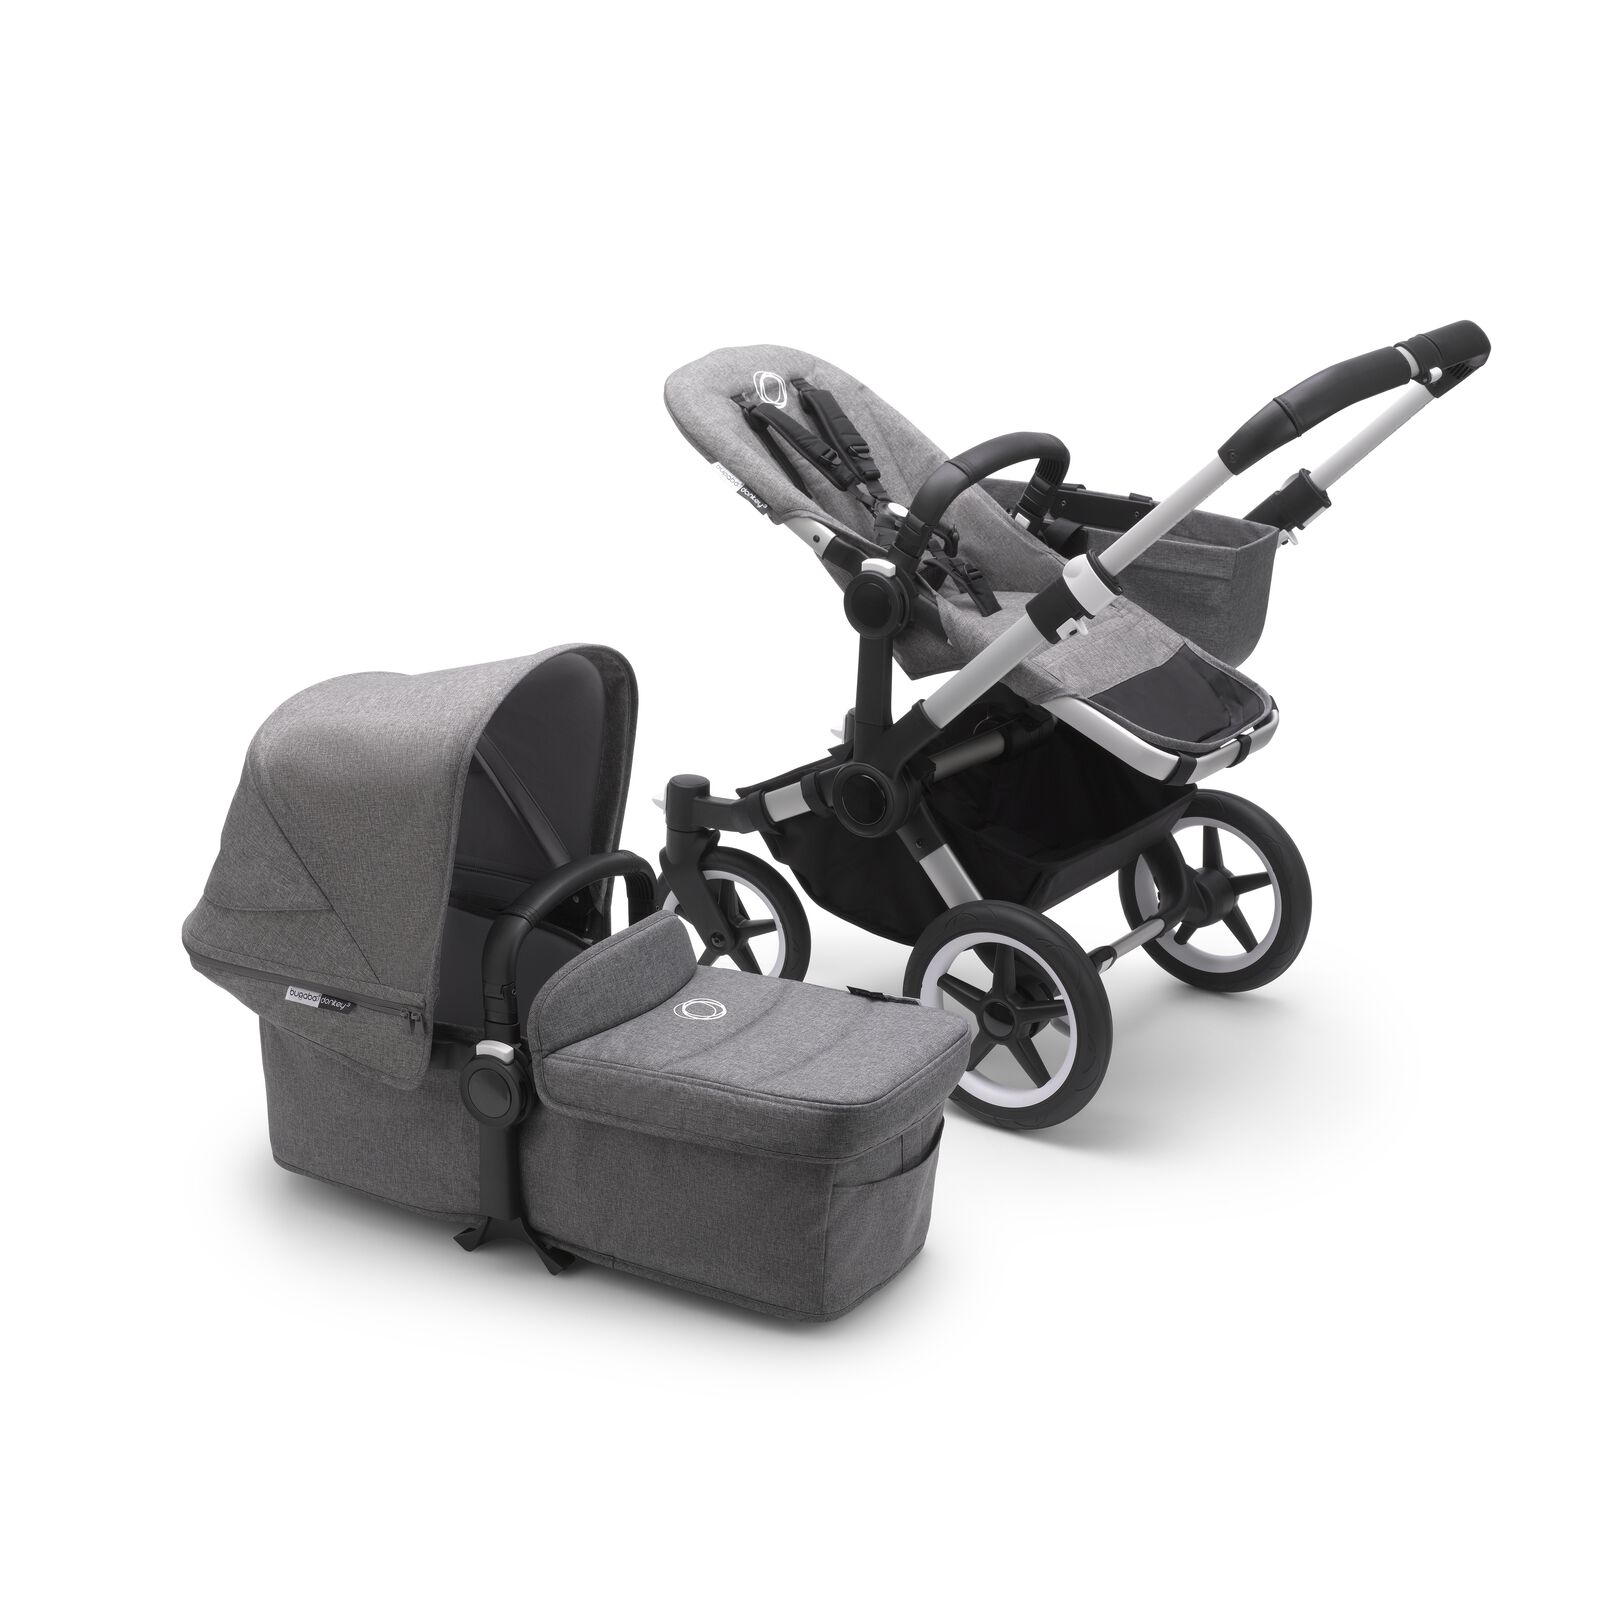 Bugaboo Donkey 3 mono bassinet and seat stroller - View 3